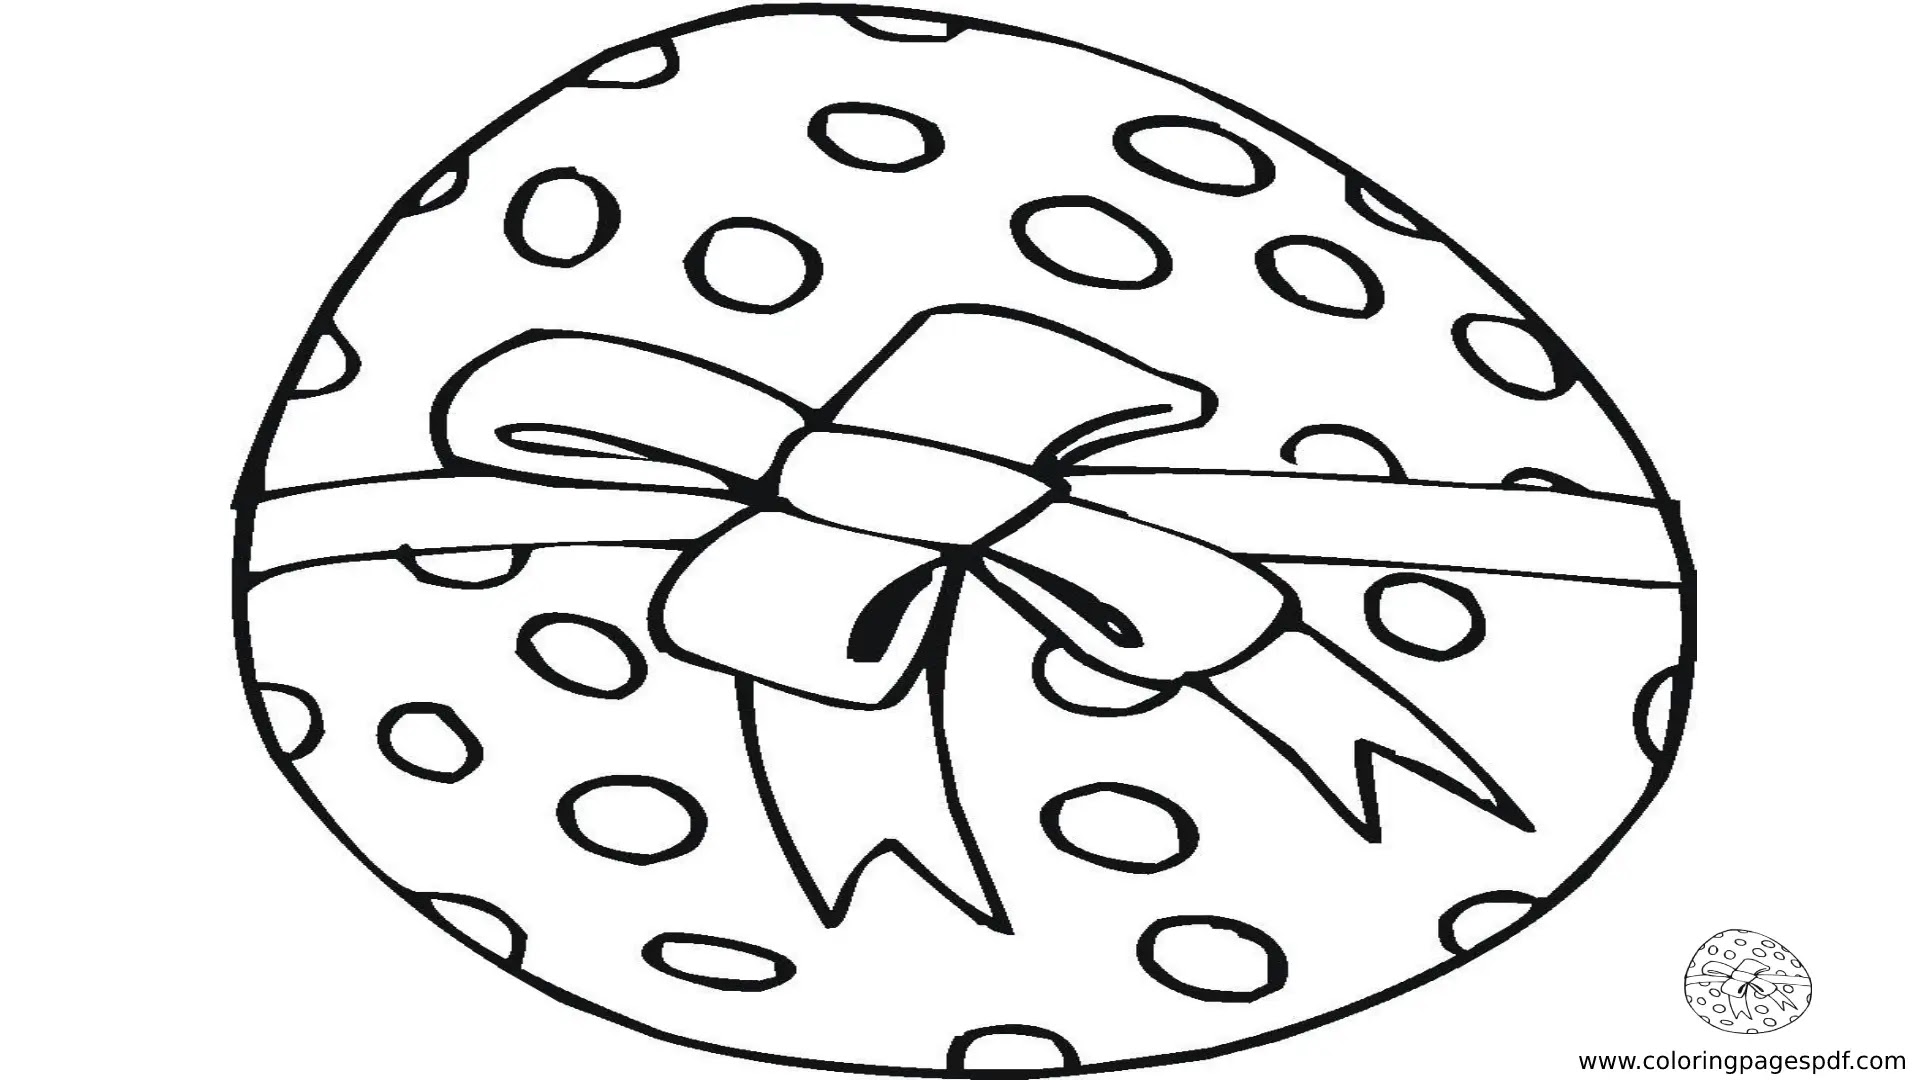 Coloring Pages Of Circled Easter Eggs